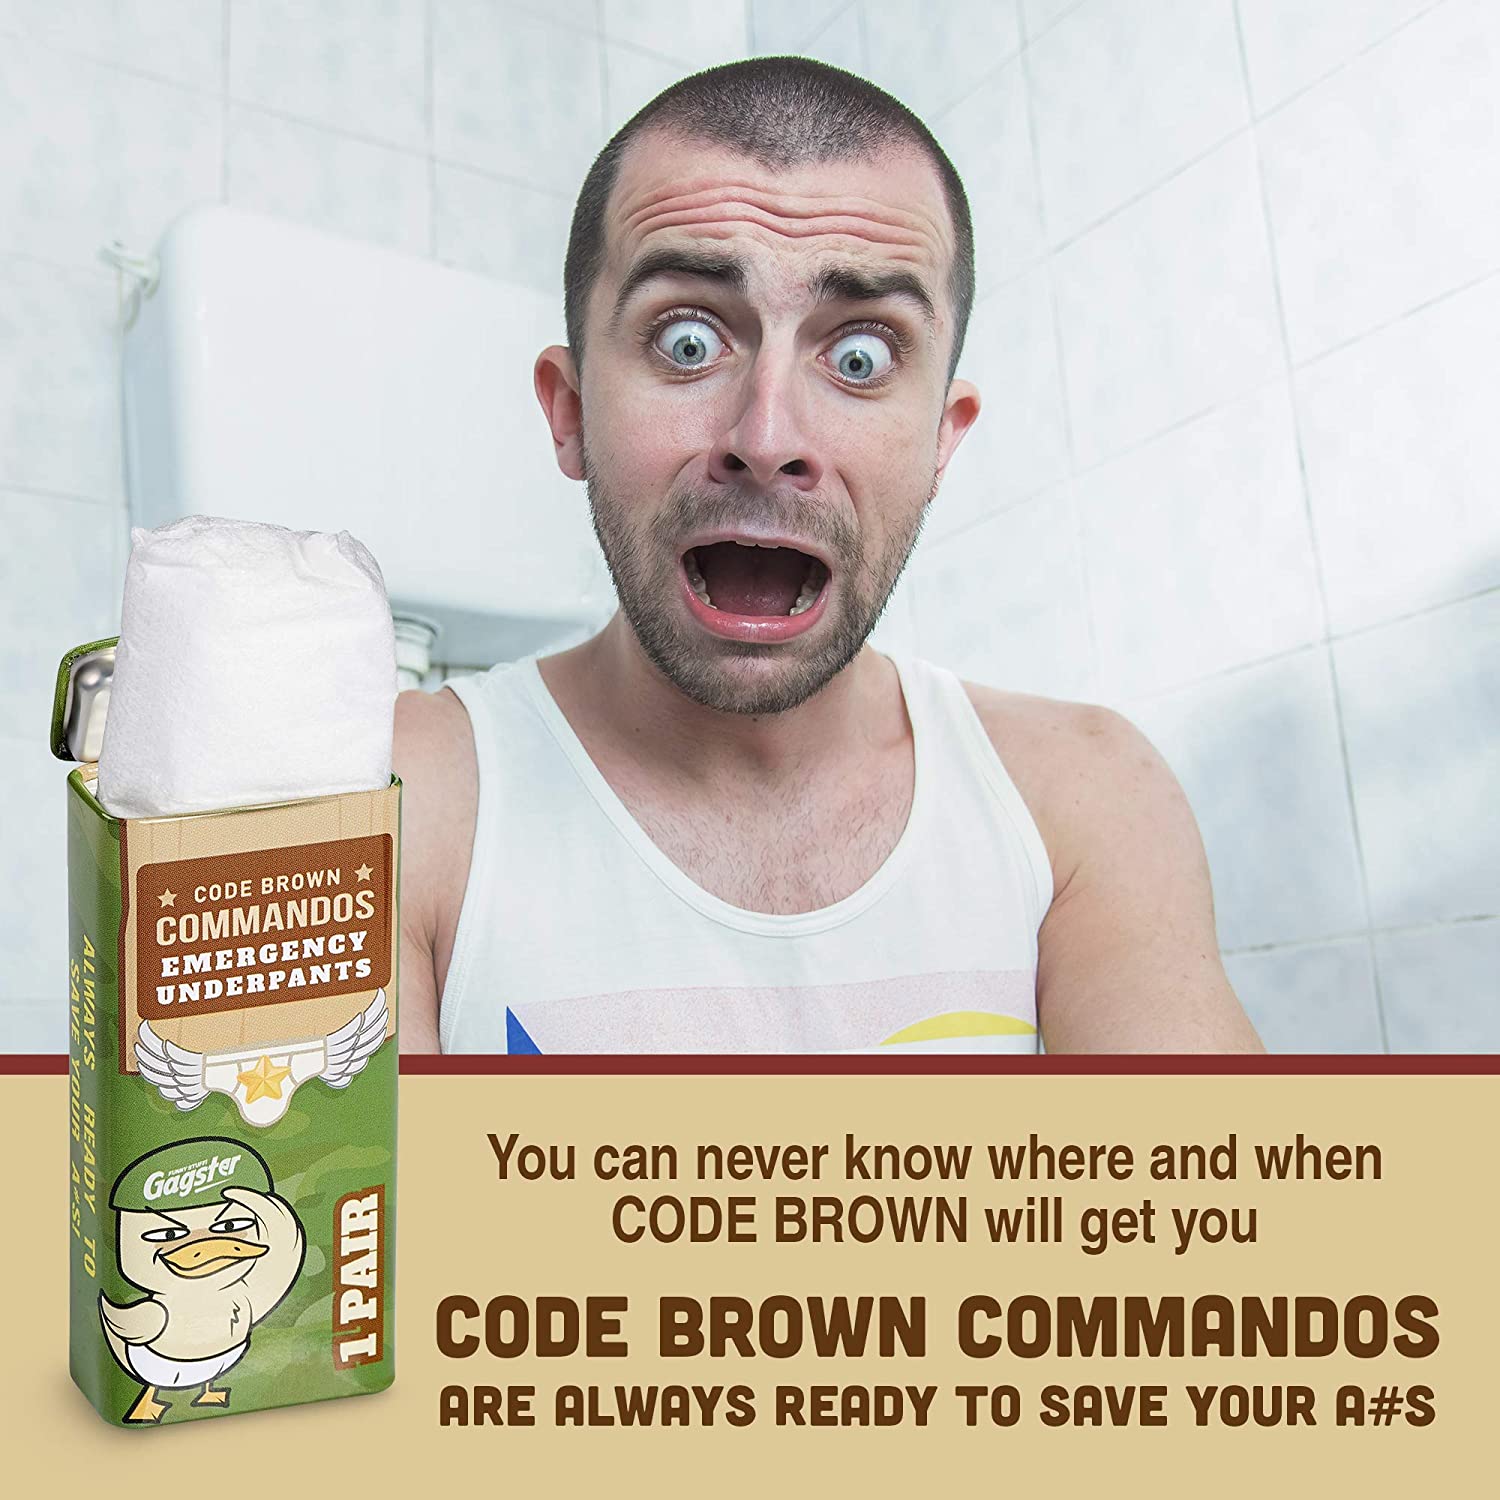 Gagster Code Brown Commandos Emergency Underpants in a Can (3 Pairs), Instant Undies Make a Terrific White Elephant Gag Gift, Funny Party Goods